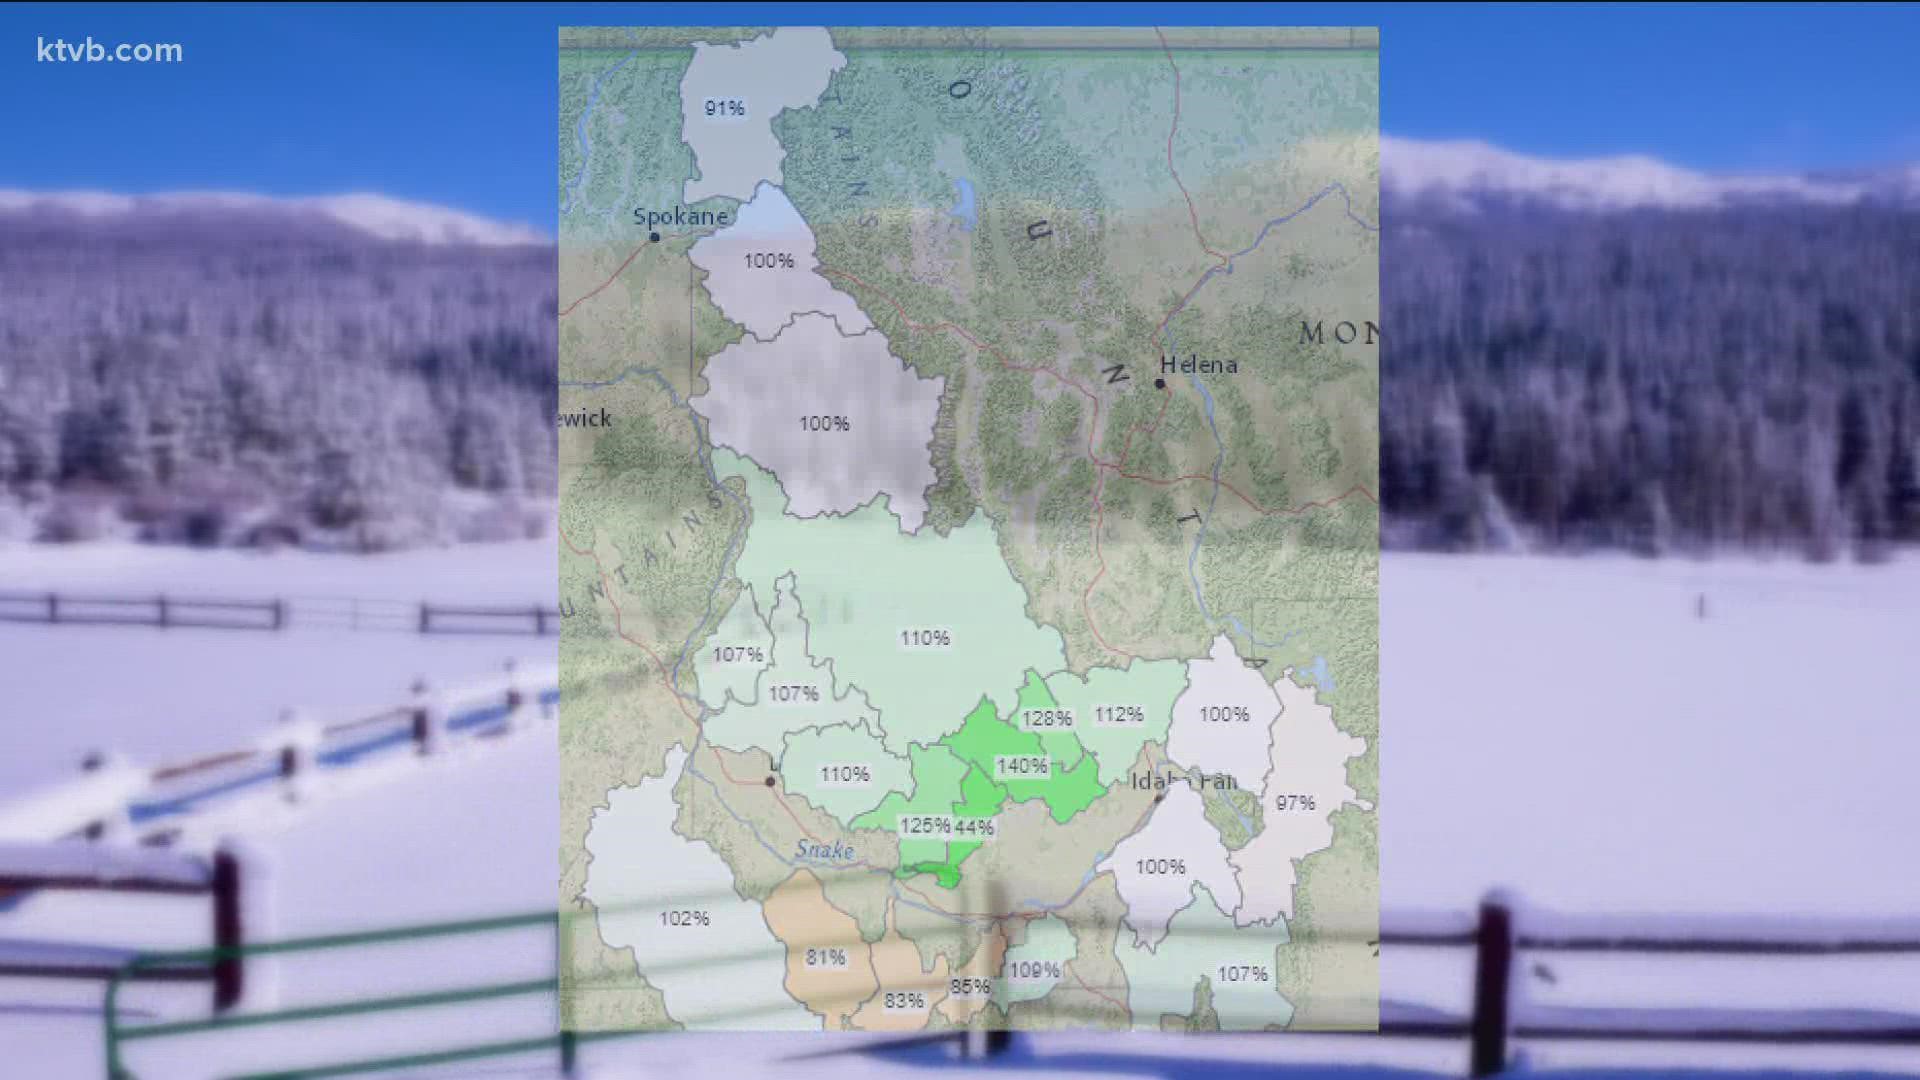 Many parts of Idaho have already seen numerous inches of snowfall this season, but it is too soon to say if it is enough to dig Idaho out of drought conditions.